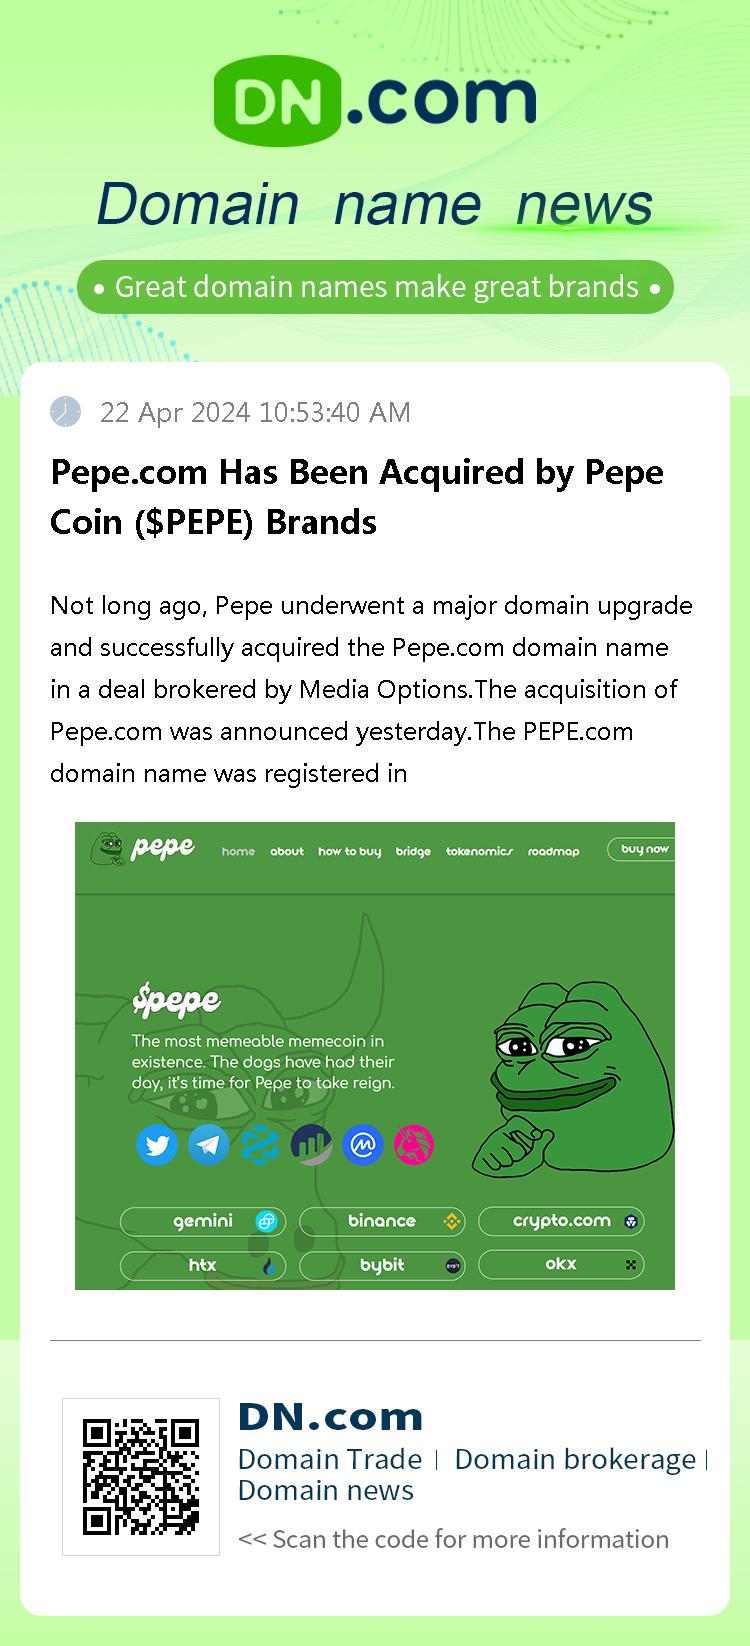 Pepe.com Has Been Acquired by Pepe Coin ($PEPE) Brands